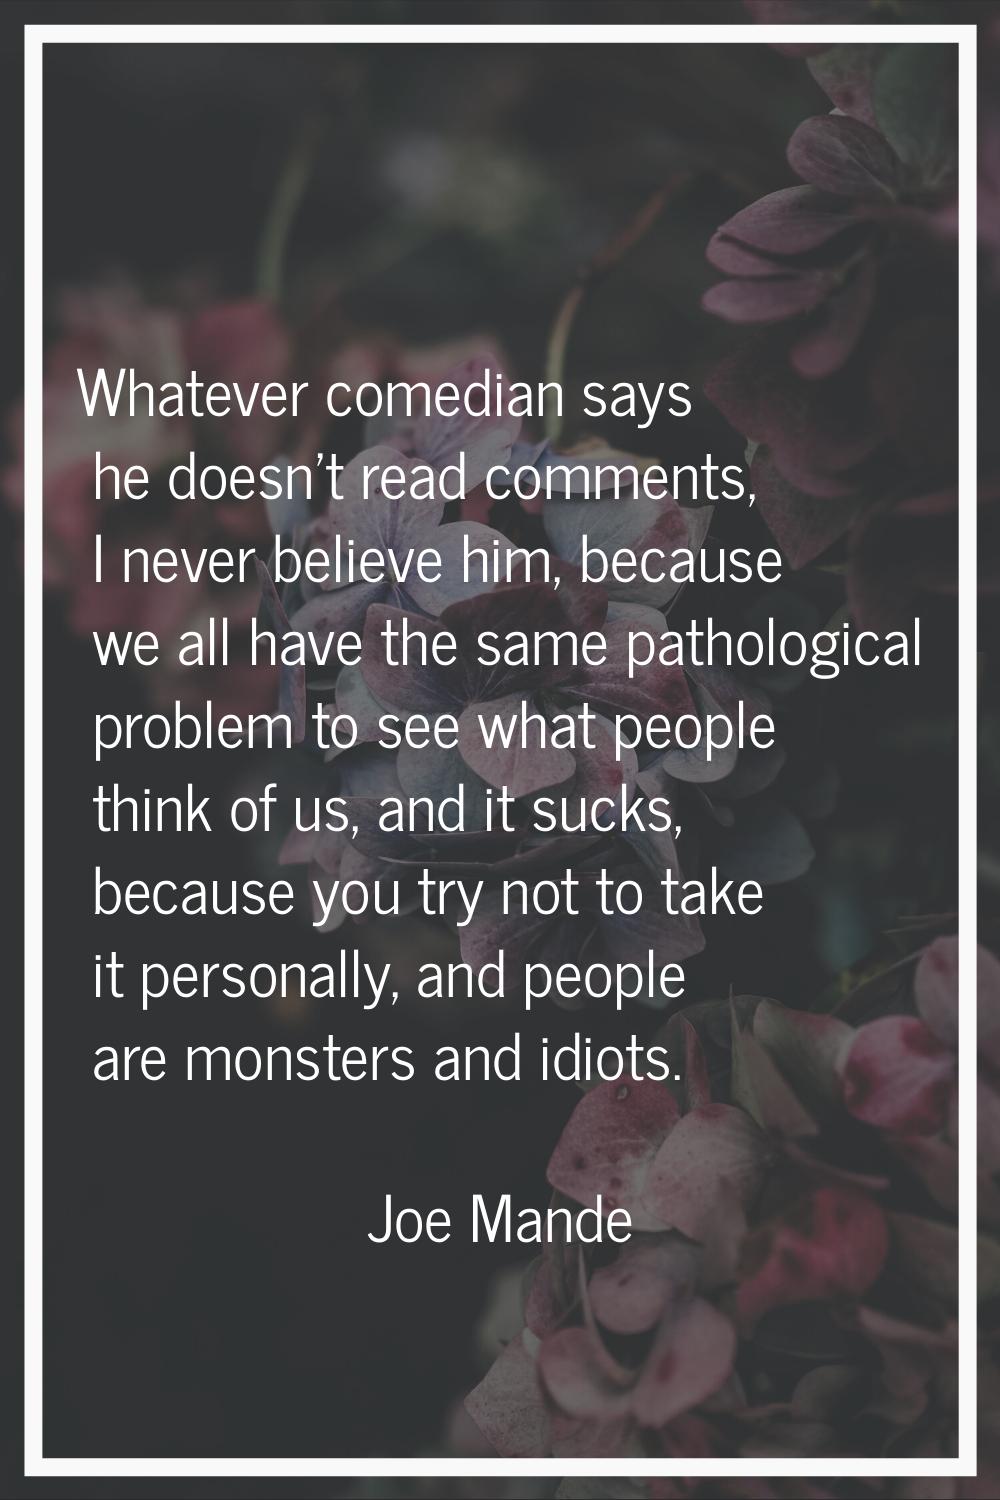 Whatever comedian says he doesn't read comments, I never believe him, because we all have the same 